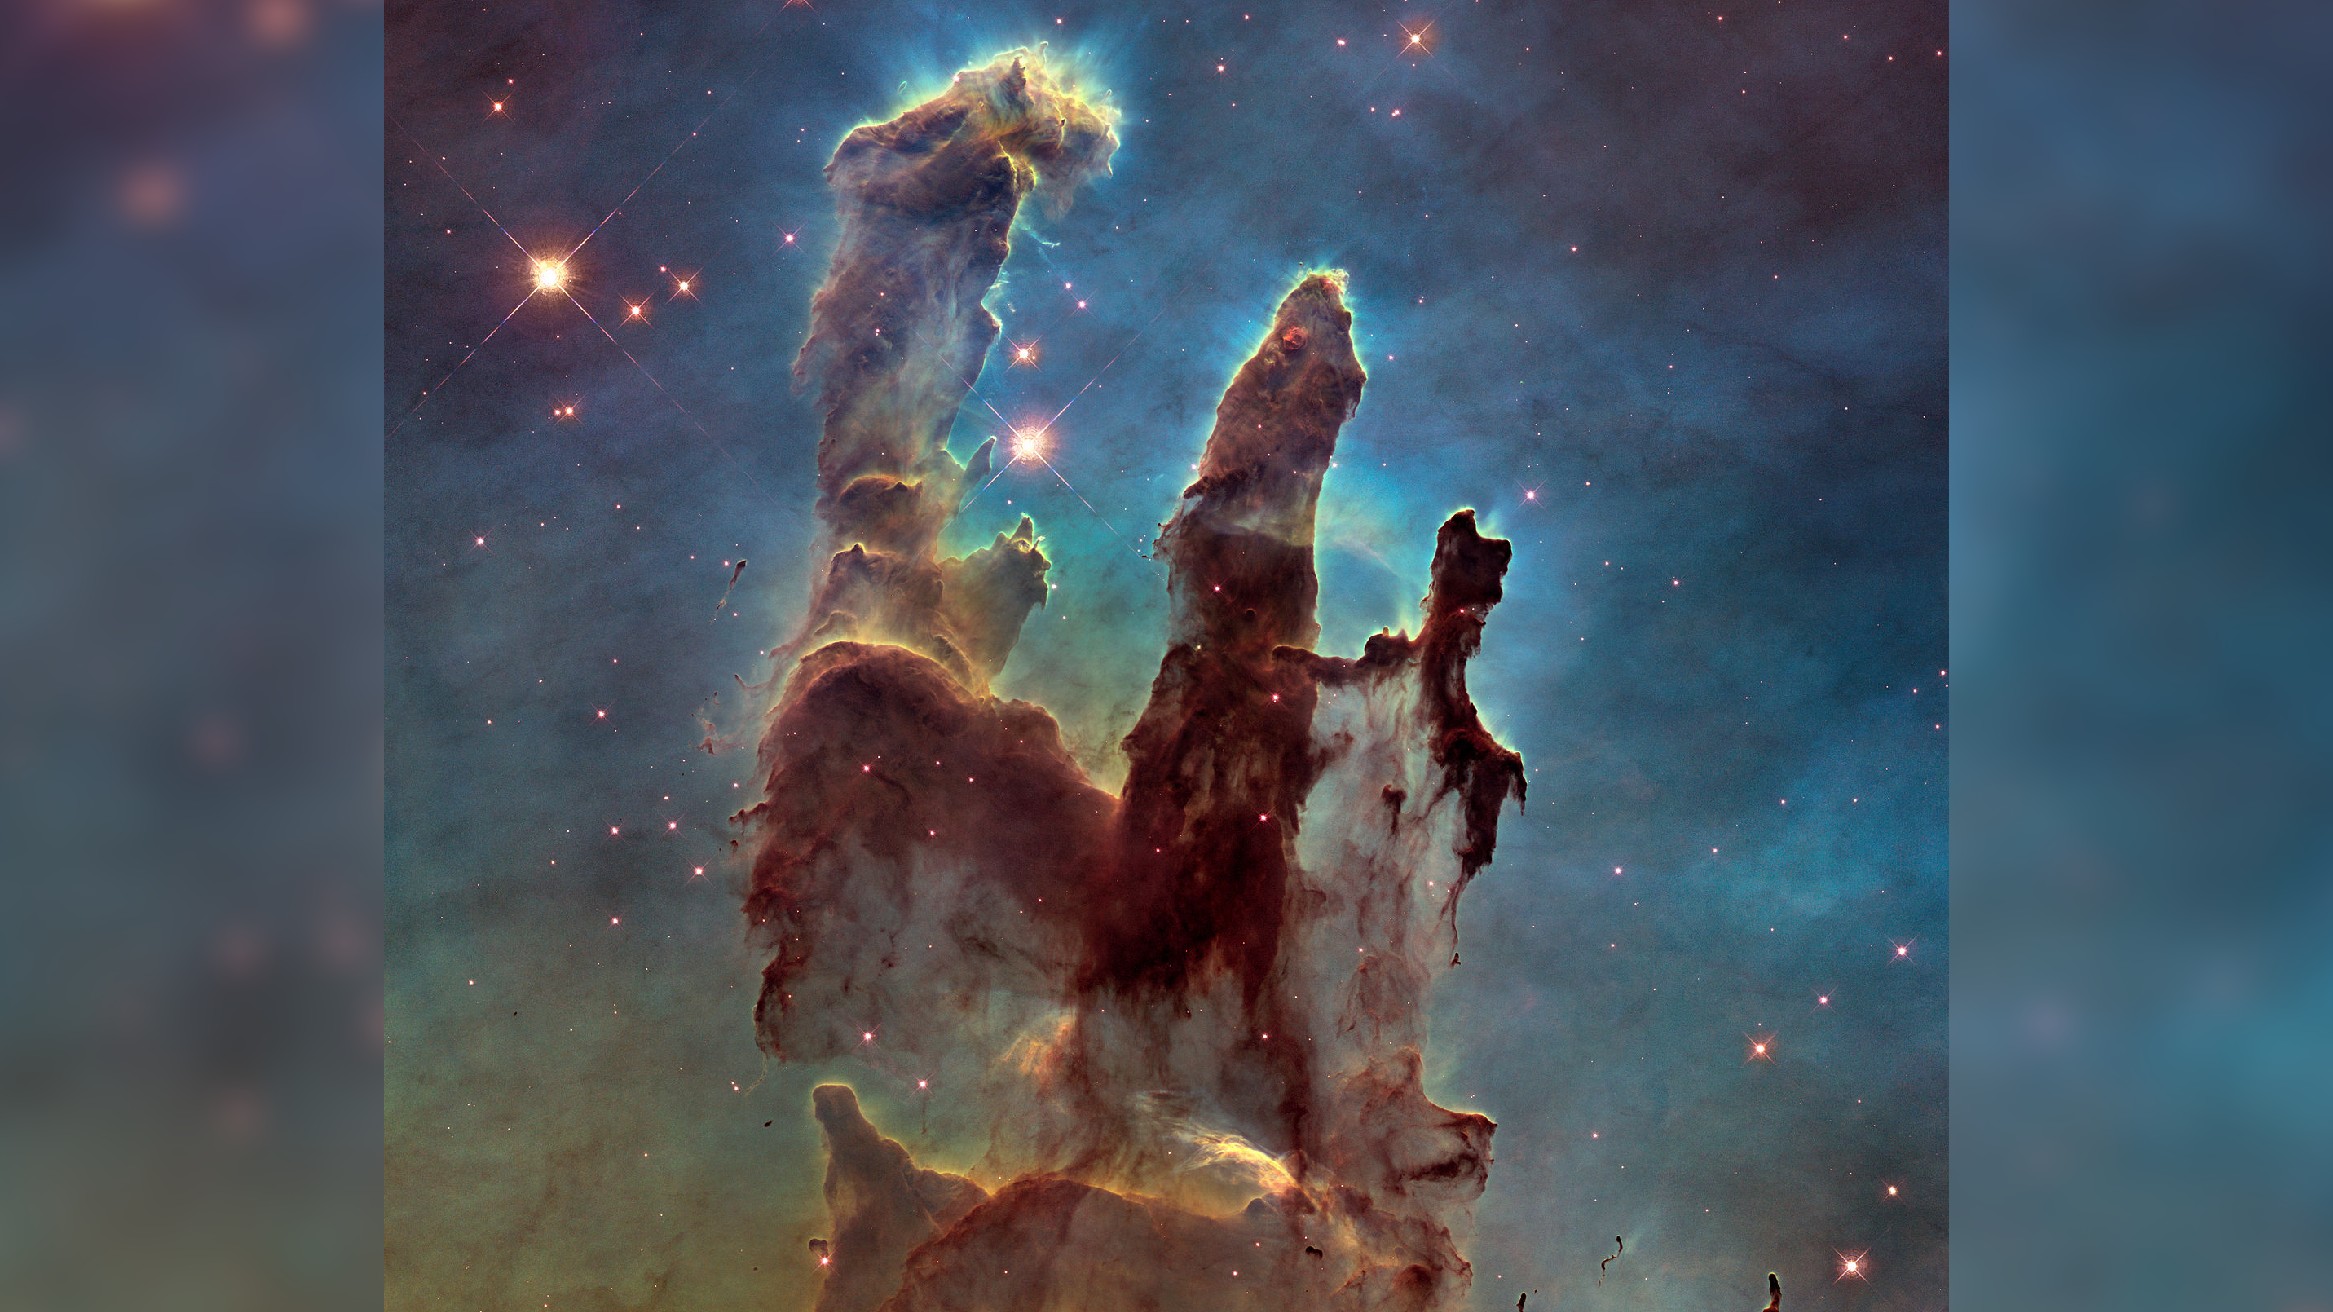 An image of the Pillars of Creation in the Eagle Nebula taken by the Hubble Space Telescope